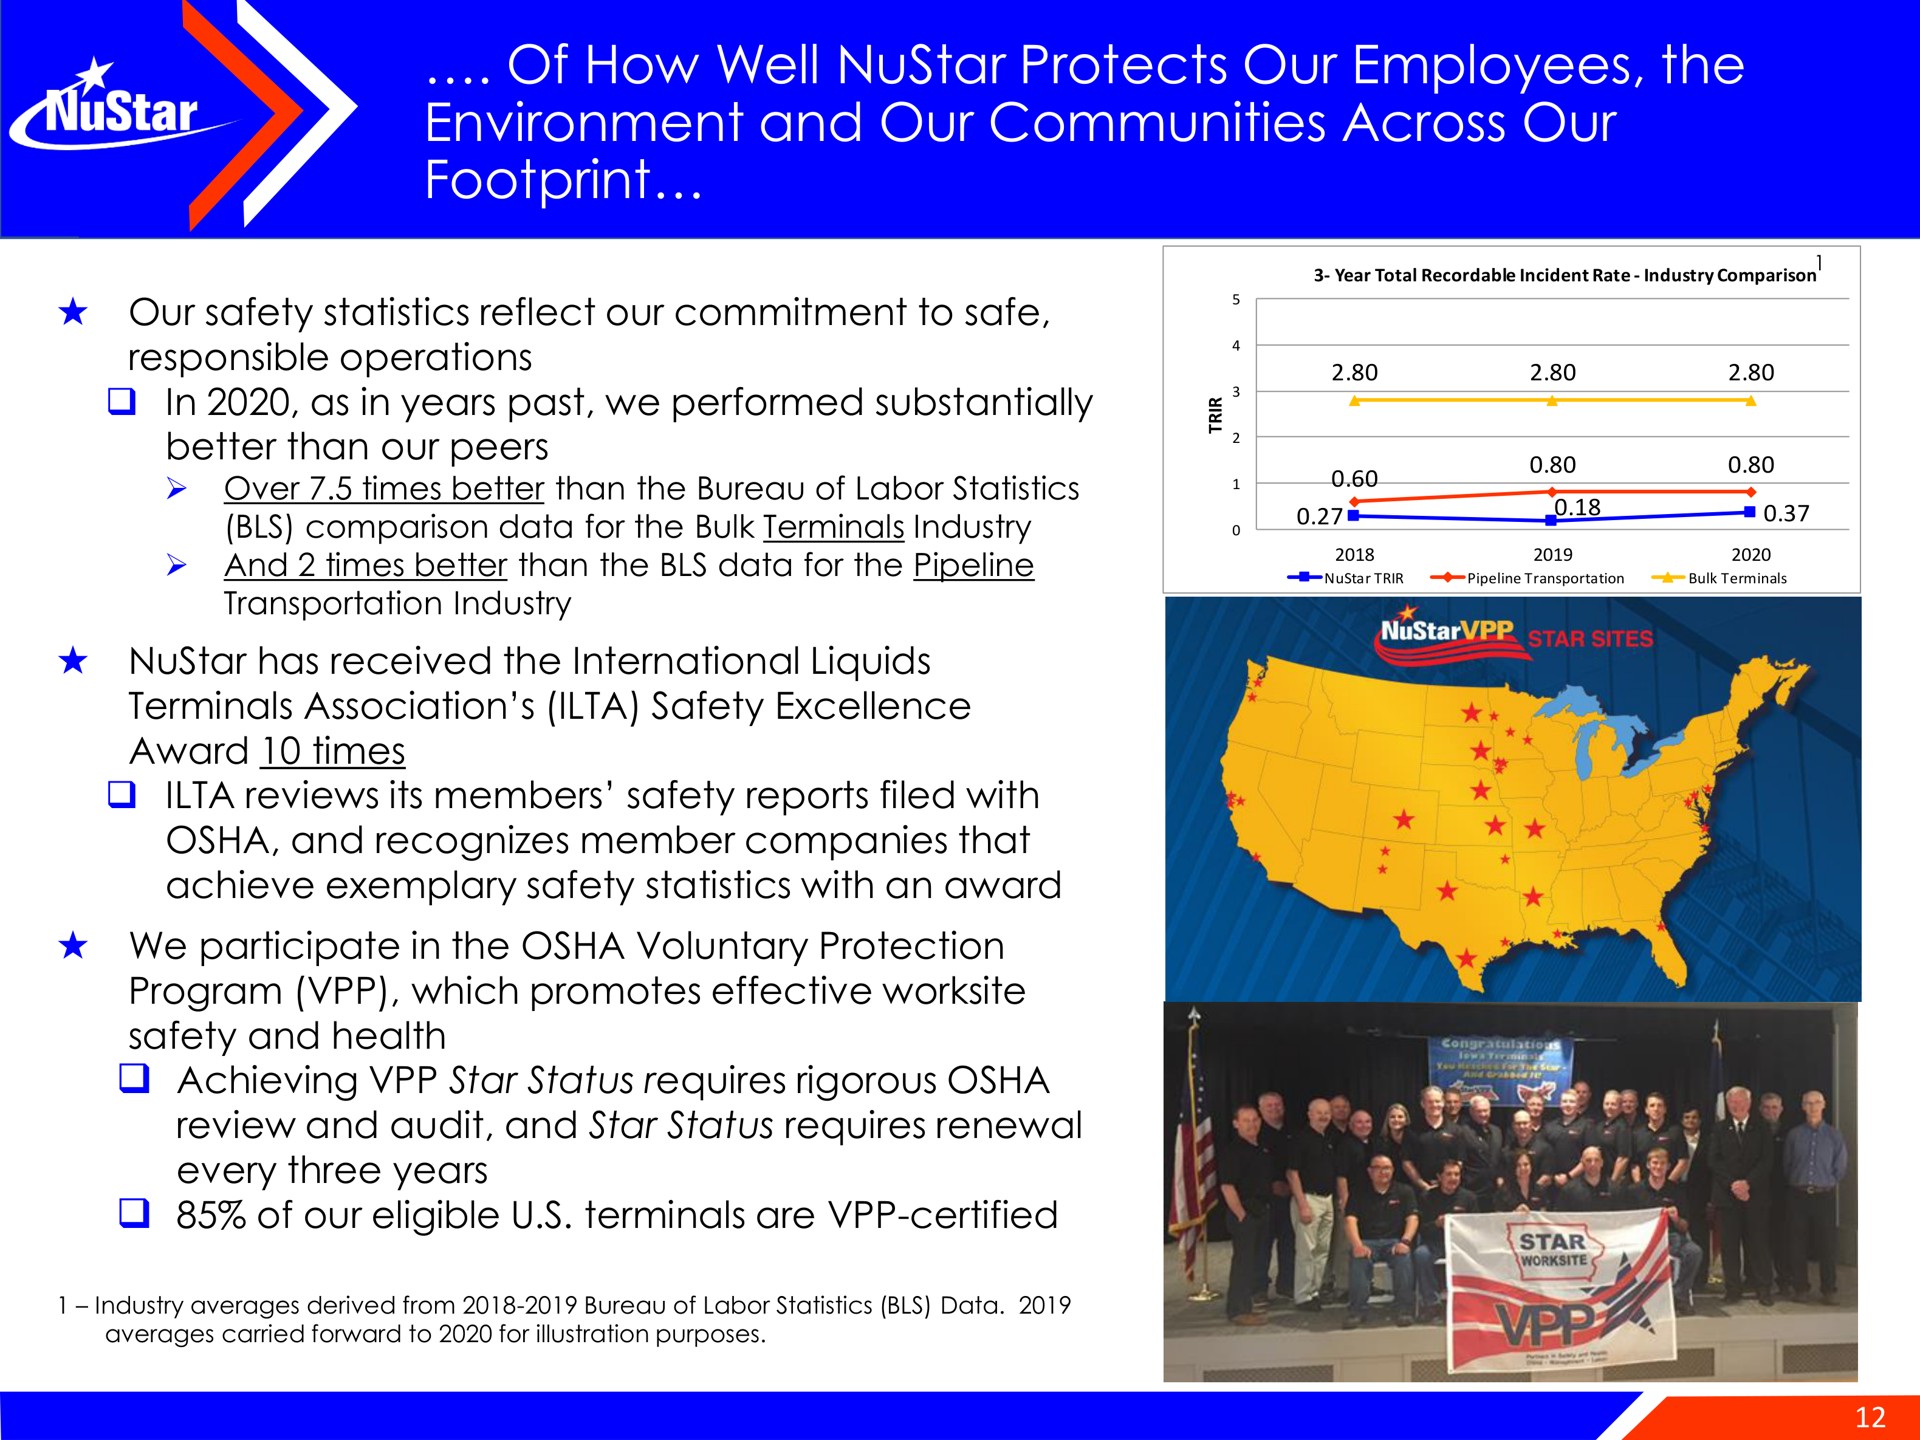 of how well protects our employees the environment and our communities across our footprint | NuStar Energy